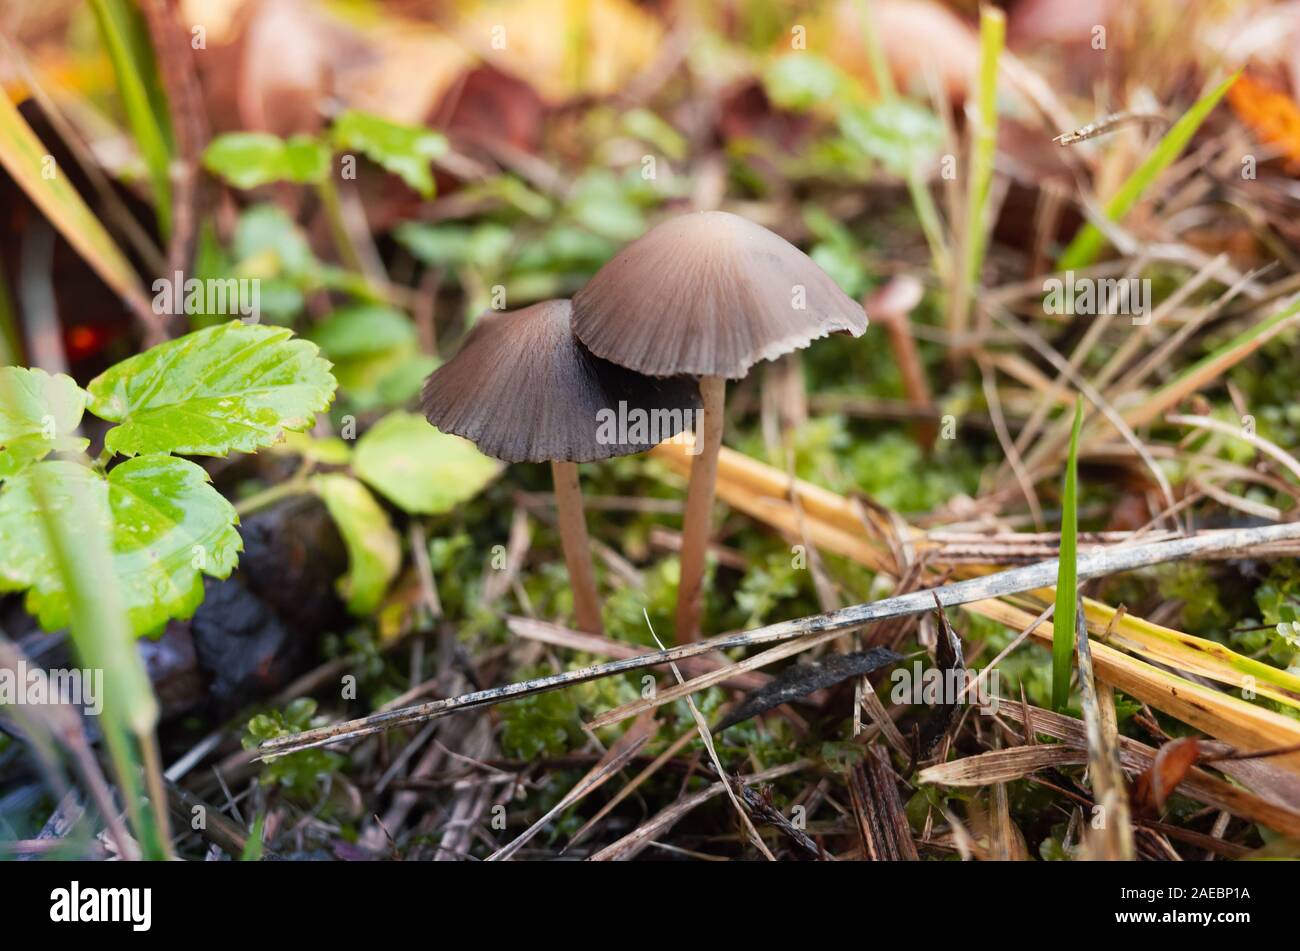 Magic mushrooms grow in a grass, close-up photo with selective focus Stock Photo